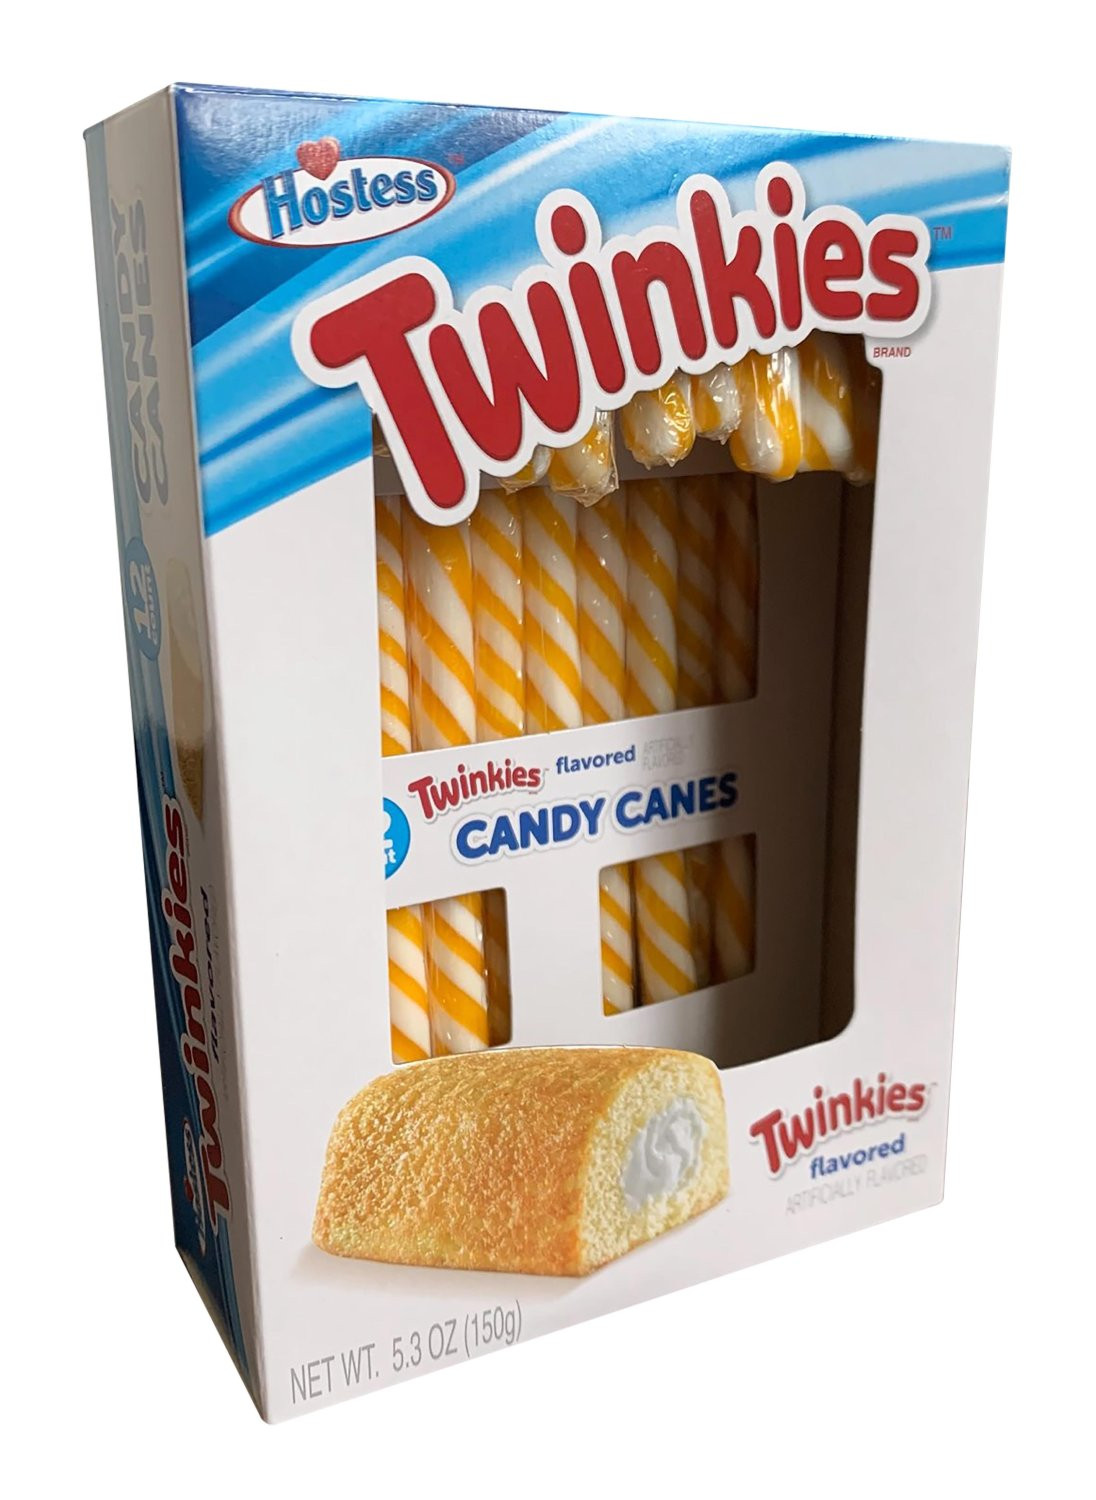 Hostess Twinkies Twinkies 12ct. Candy Cradle Canes 5.3oz. 